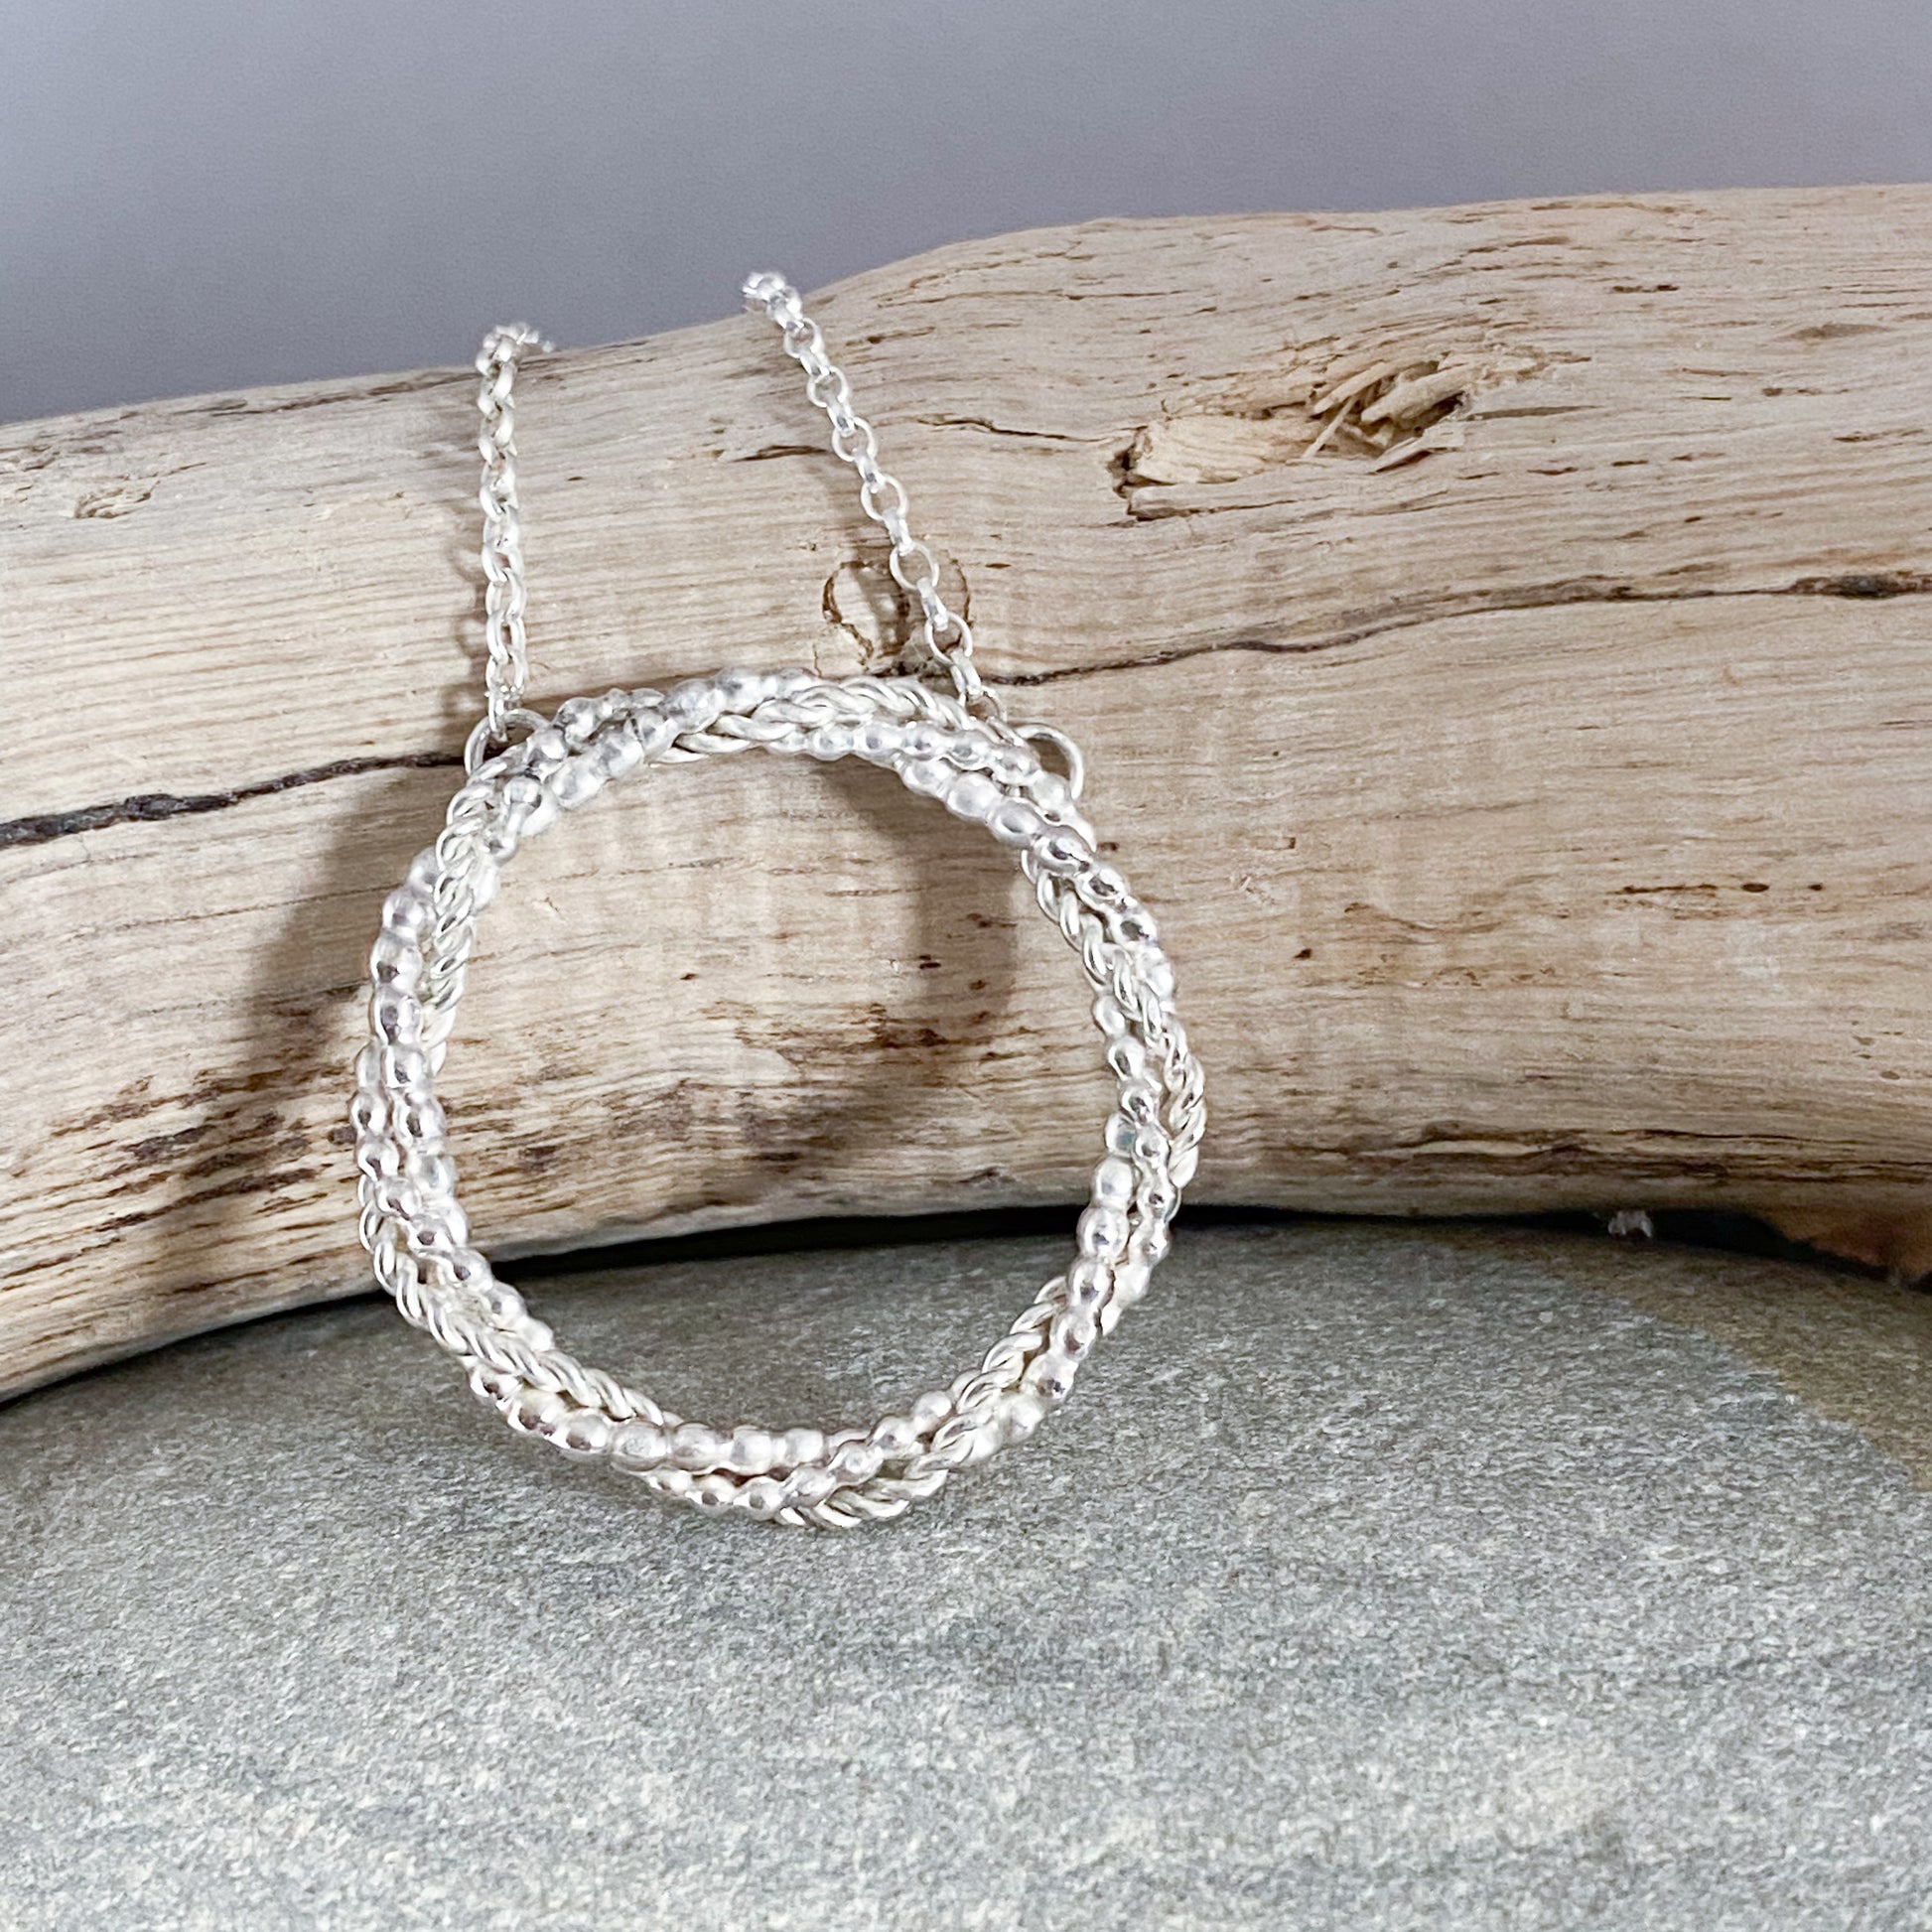 Infinitely Entwined Necklace, Necklace, Small Dog Silver